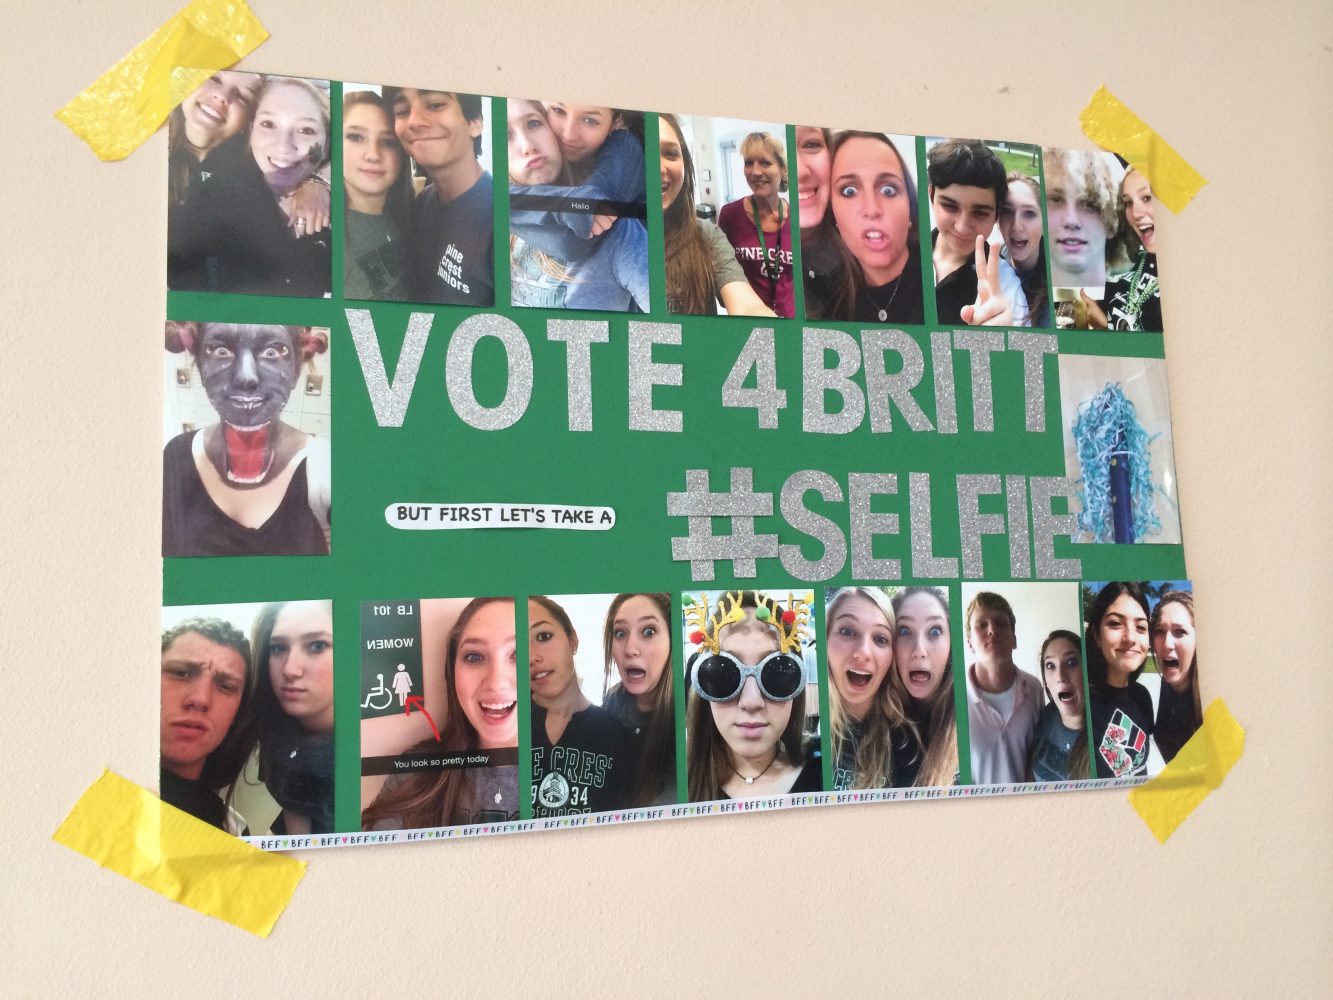 Brittany Paris campaign poster showing off beautiful selfies.
(via Samantha Meade)